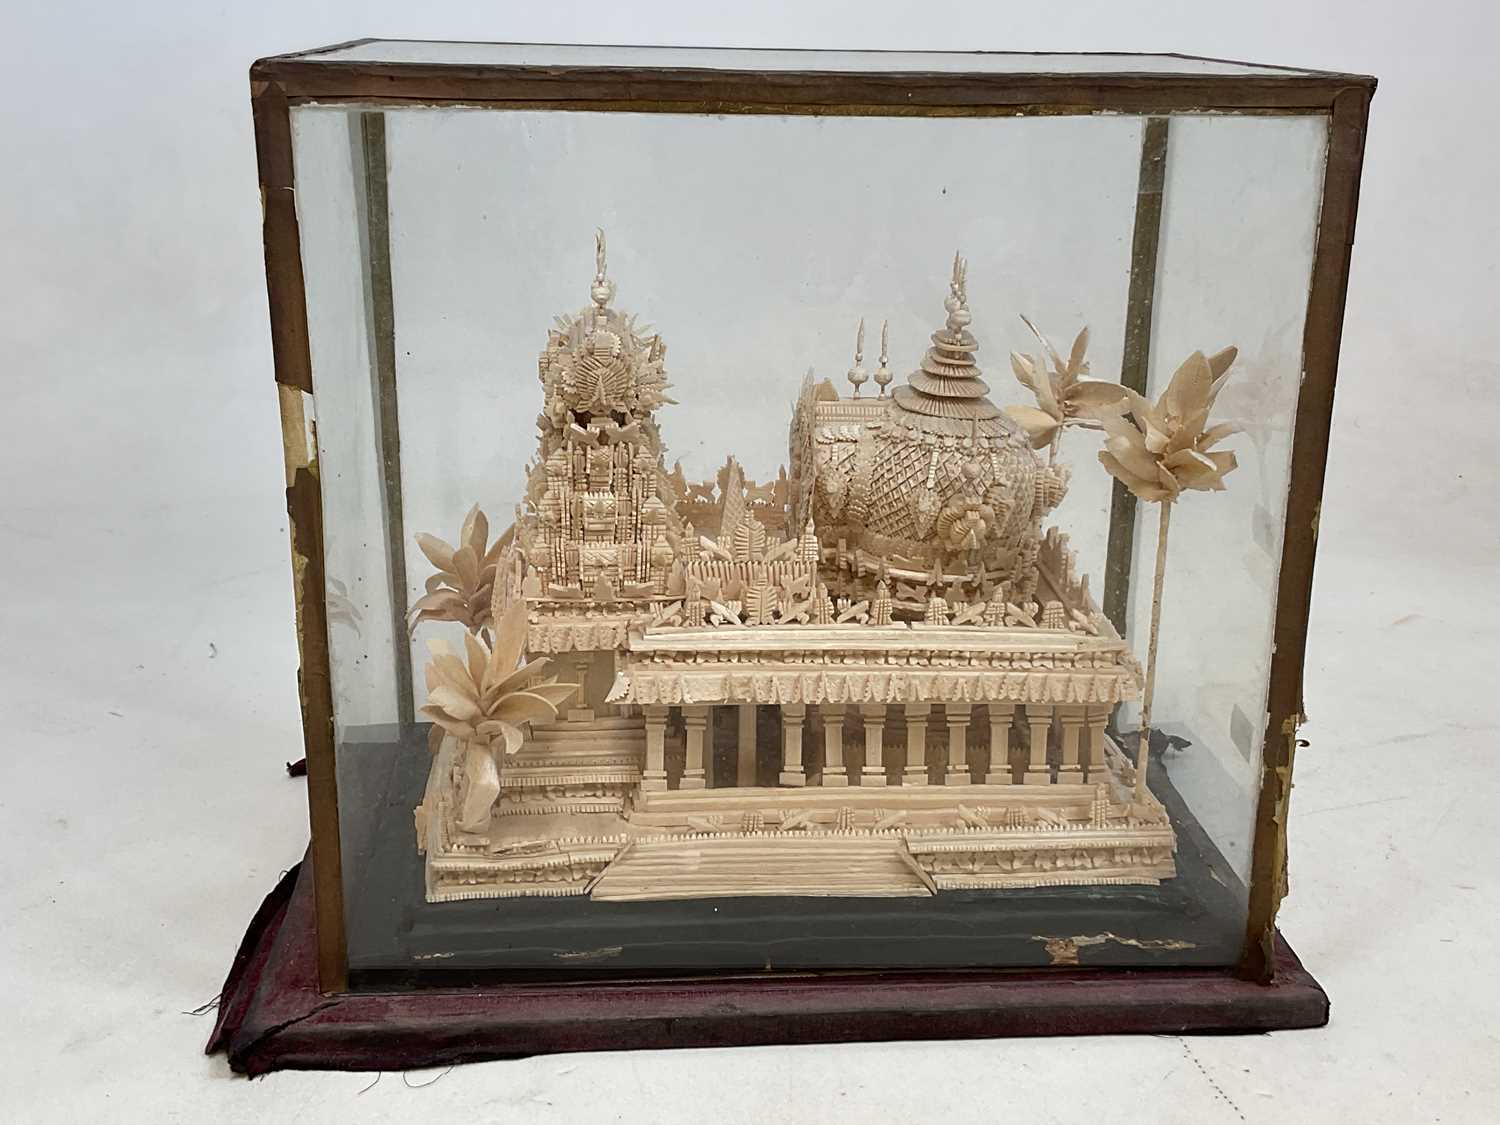 A very unusual model of an unknown palace constructed from matchsticks, believed to be a WWI